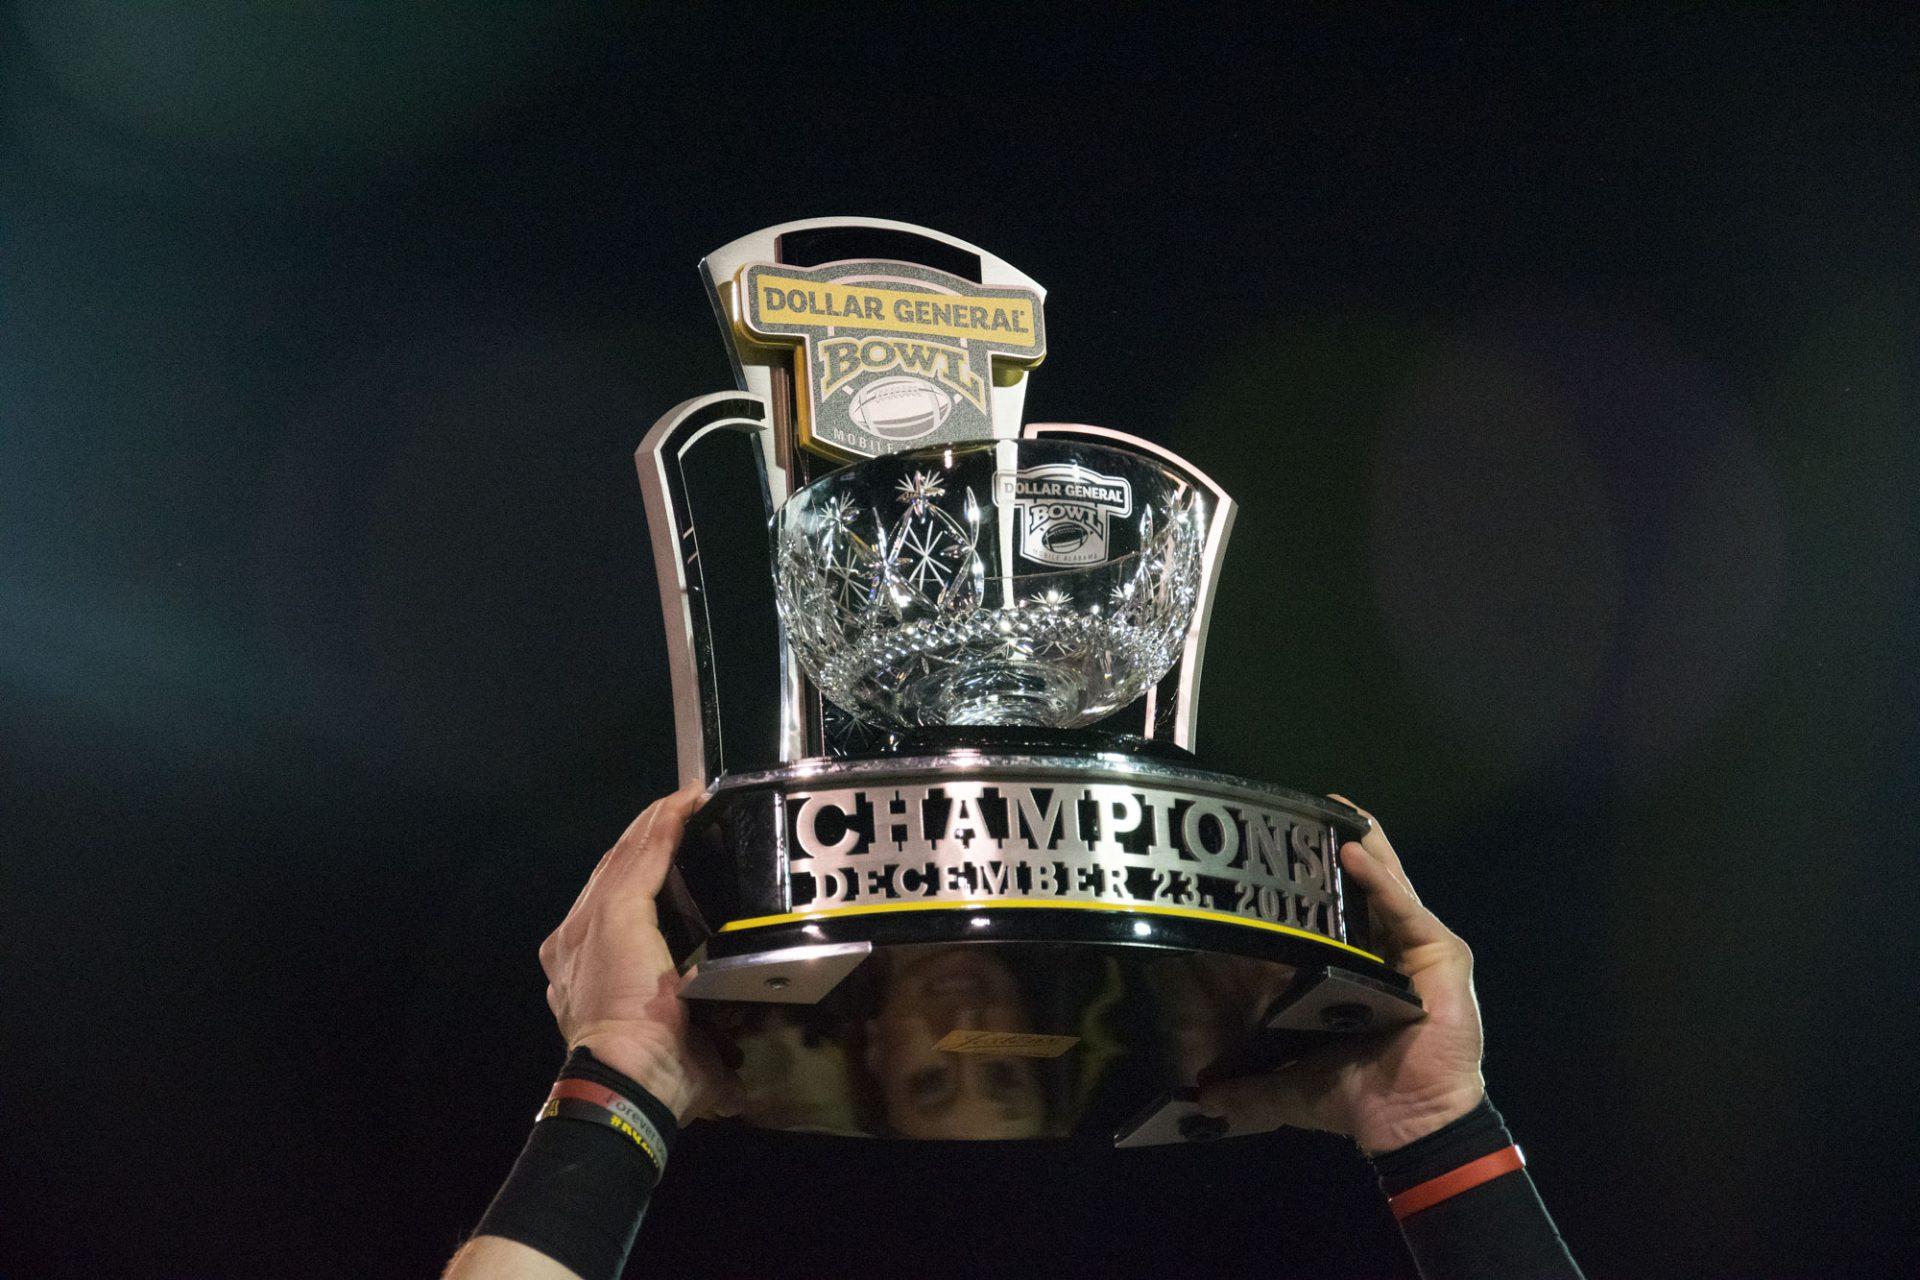 Eric Boggs lifts the Dollar General Bowl trophy during the post-game celebrations on December 23rd in Toledo.